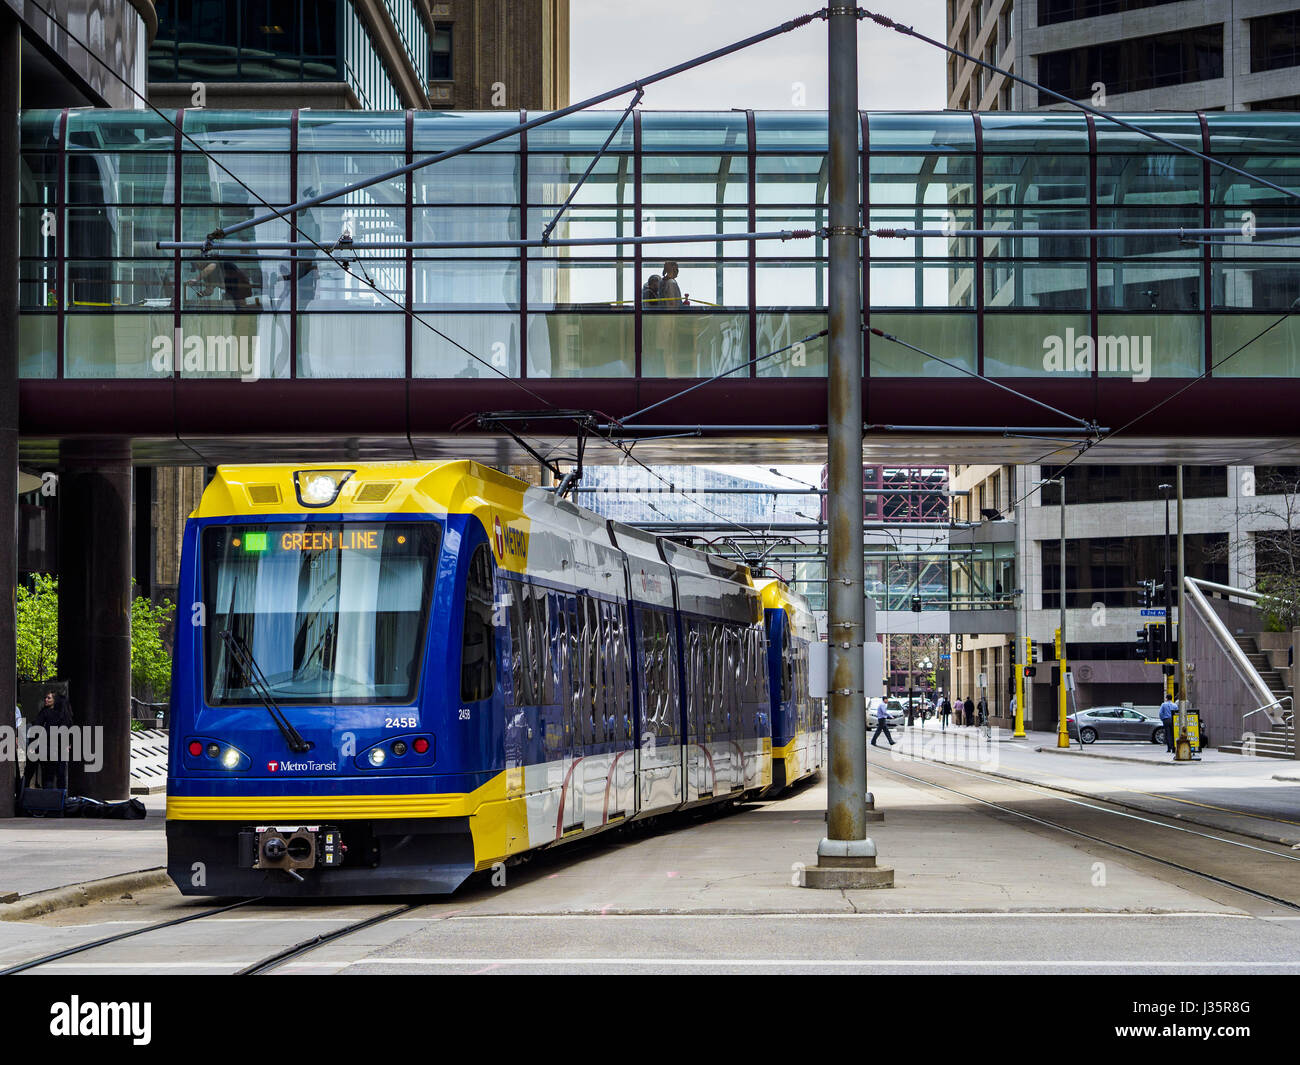 Minneapolis, Minnesota, USA. 3rd May, 2017. A Minneapolis light rail train goes under the skyway on 5th Street in Minneapolis. The skyways are enclosed pedestrian overpasses that connect downtown buildings. The Minneapolis Skyway was started in the early 1960s as a response to covered shopping malls in the suburbs that were drawing shoppers out of the downtown area. The system grew sporadically until 1974, when the construction of the IDS Center and its center atrium, called the Crystal Court, served as a hub for the downtown skyway system. There are 8 miles of skyways, connecting most of the Stock Photo